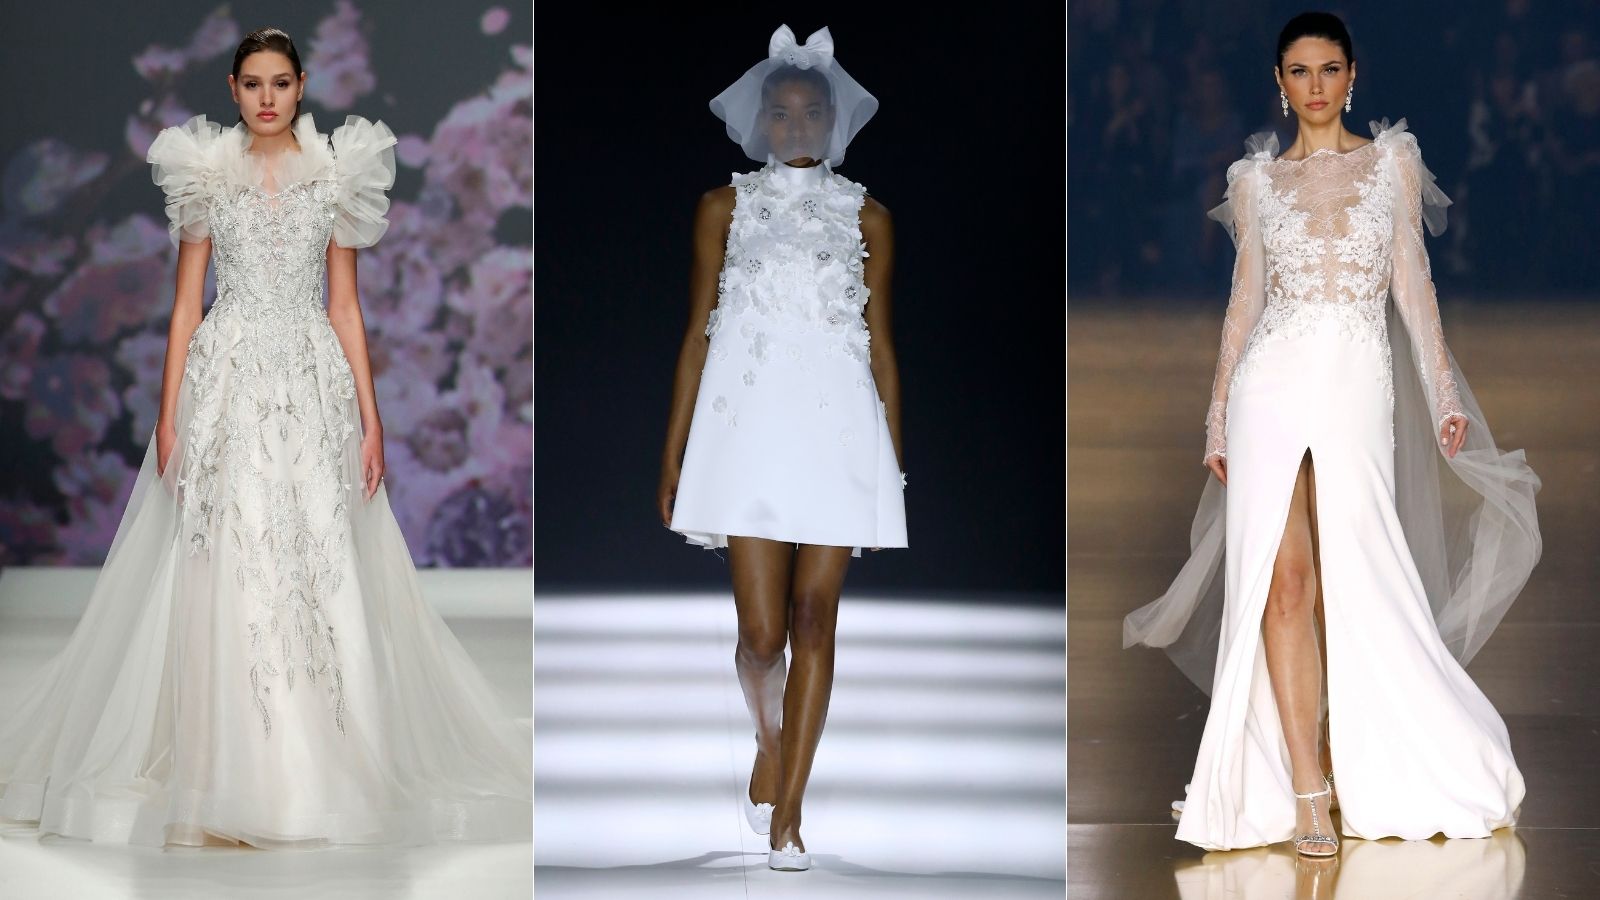 Daily Cup of Couture: Dramatic Dior Couture Wedding Gown